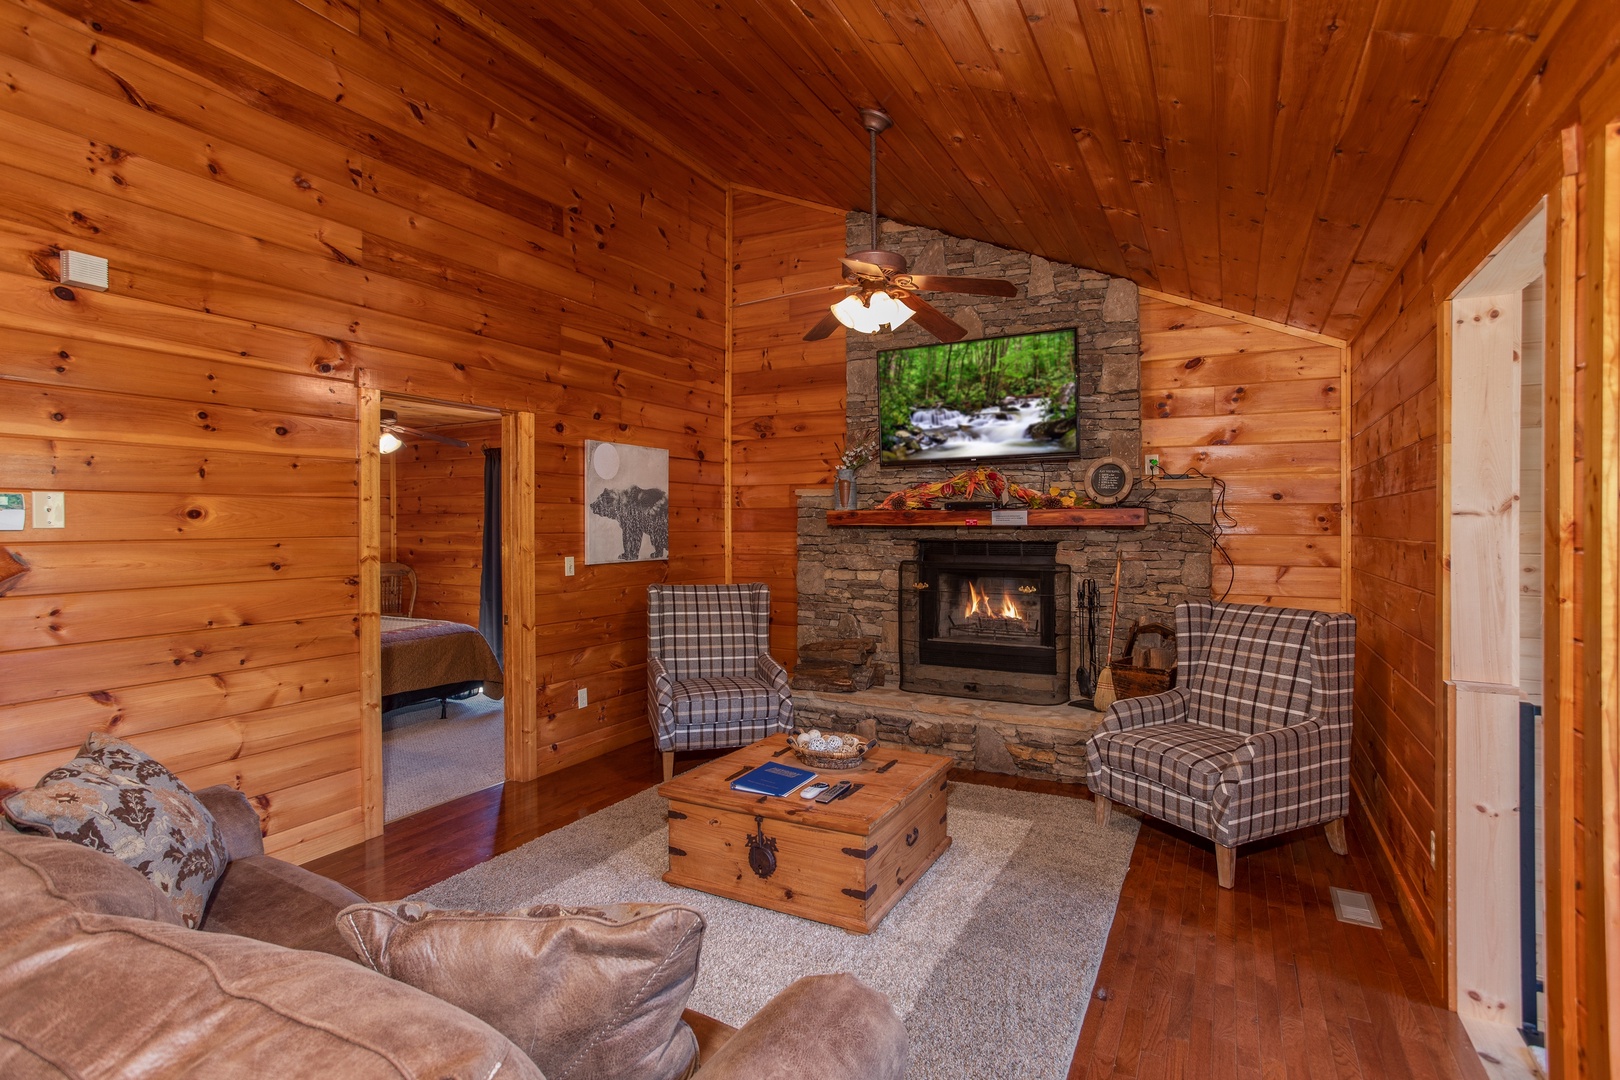 Living room with a fireplace and TV above at Cabin Fever, a 4-bedroom cabin rental located in Pigeon Forge